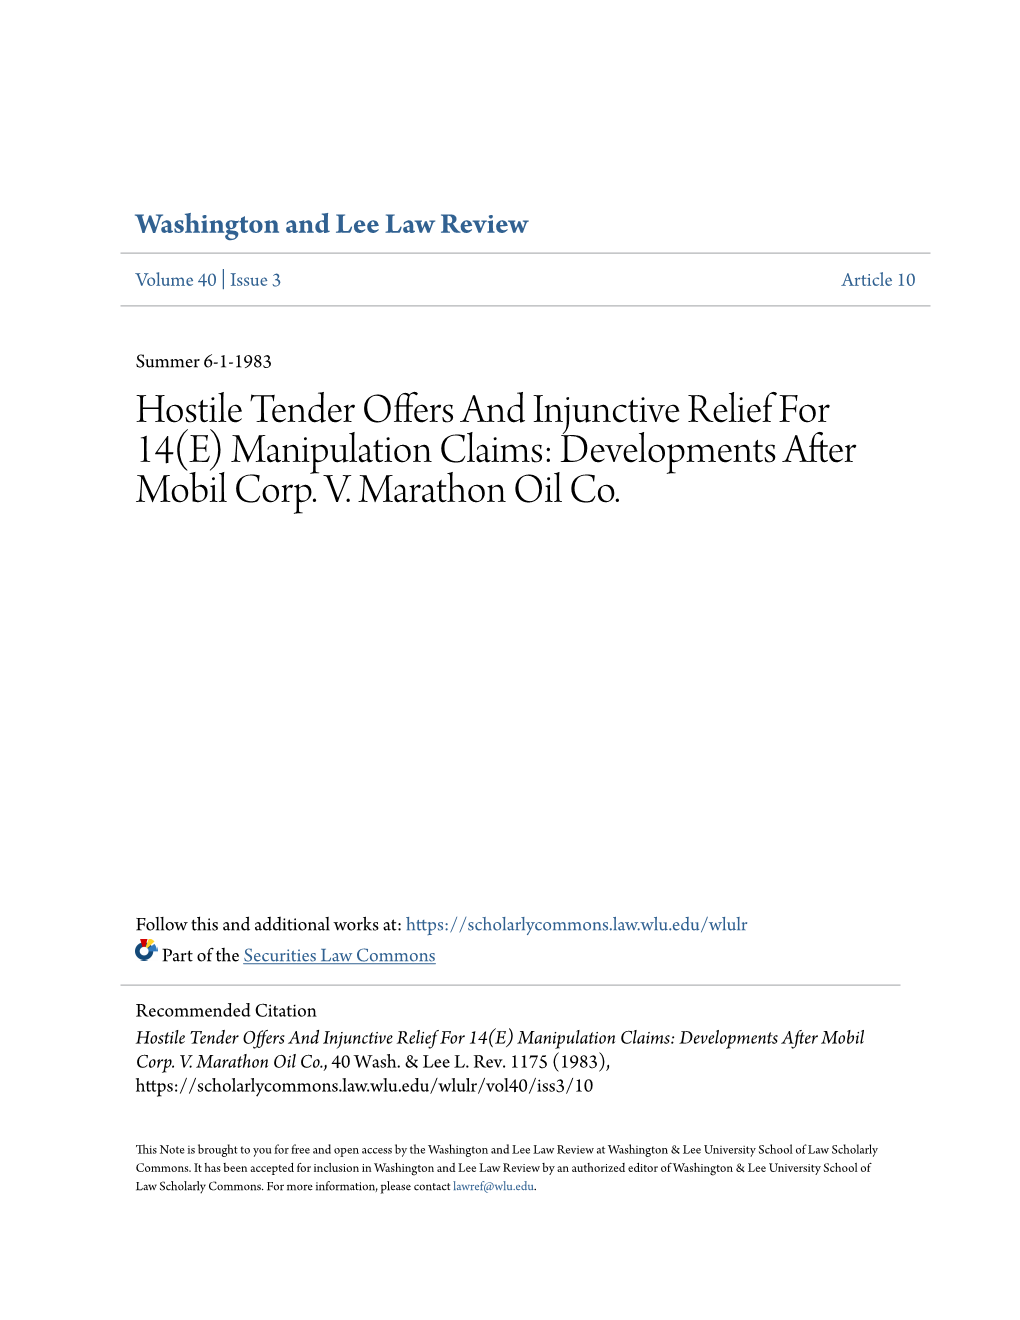 Hostile Tender Offers and Injunctive Relief for 14(E) Manipulation Claims: Developments After Mobil Corp